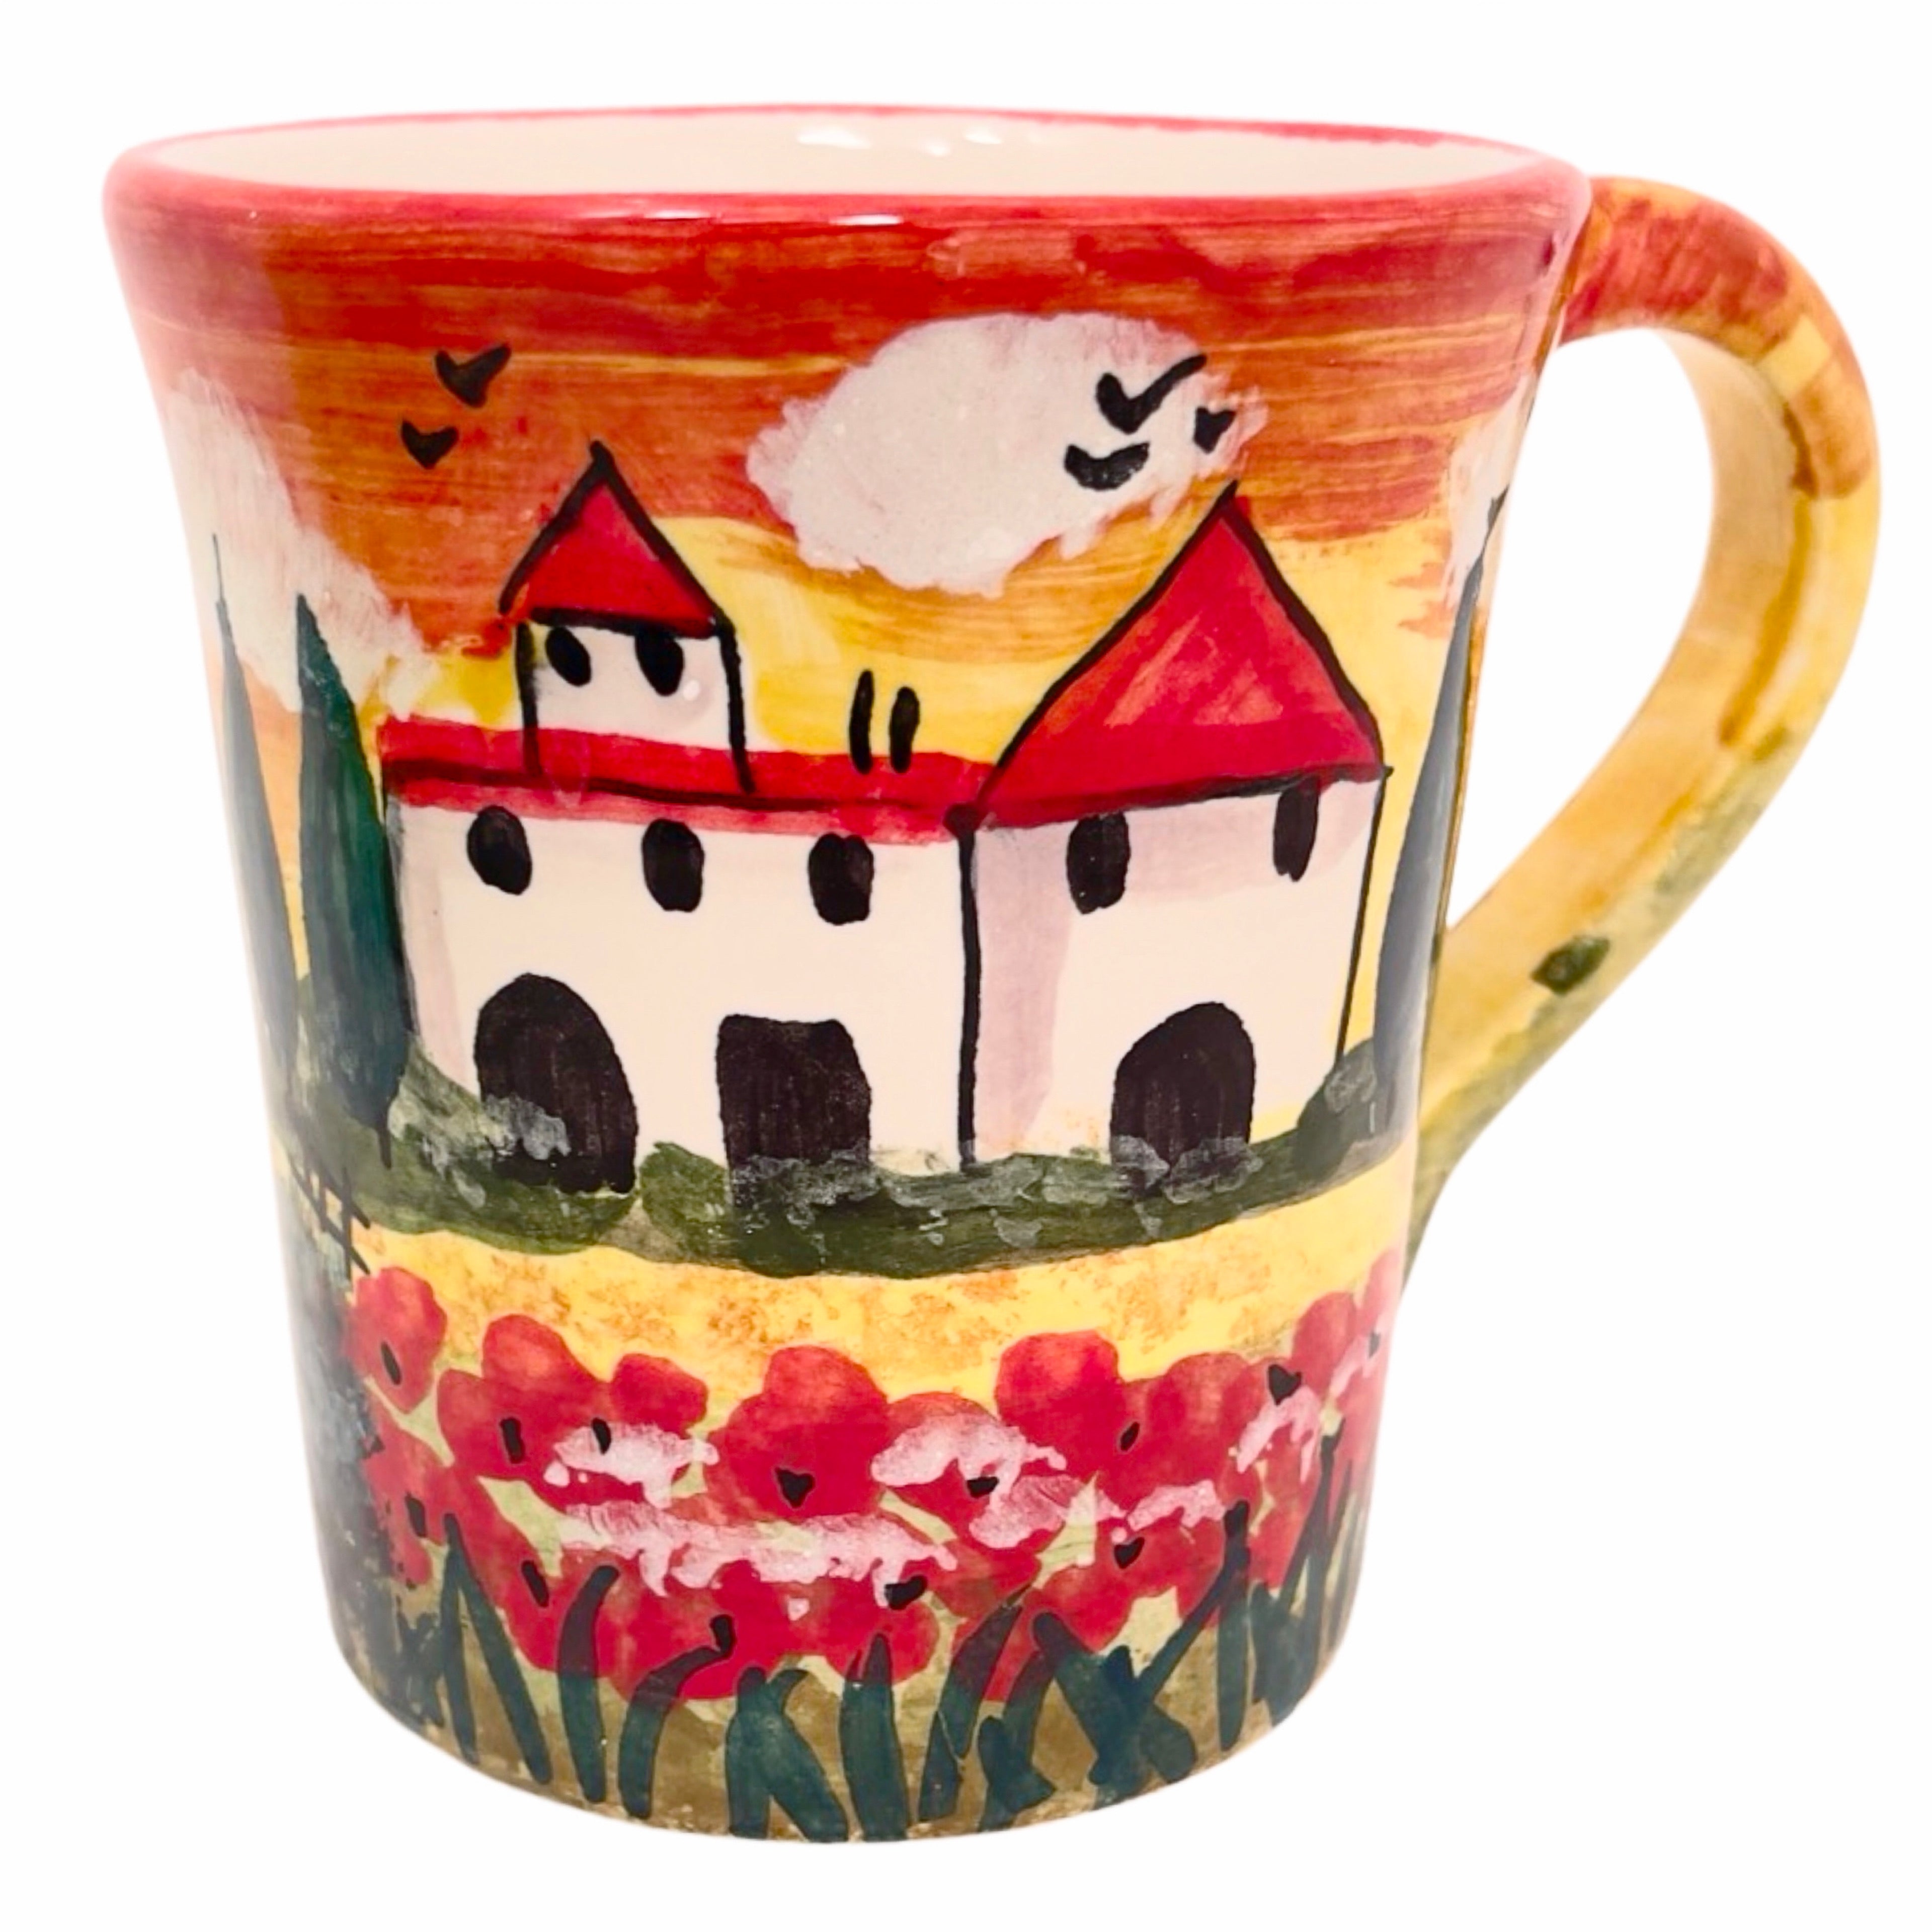 Tuscan Sunset Countryside Mug, ceramics, pottery, italian design, majolica, handmade, handcrafted, handpainted, home decor, kitchen art, home goods, deruta, majolica, Artisan, treasures, traditional art, modern art, gift ideas, style, SF, shop small business, artists, shop online, landmark store, legacy, one of a kind, limited edition, gift guide, gift shop, retail shop, decorations, shopping, italy, home staging, home decorating, home interiors